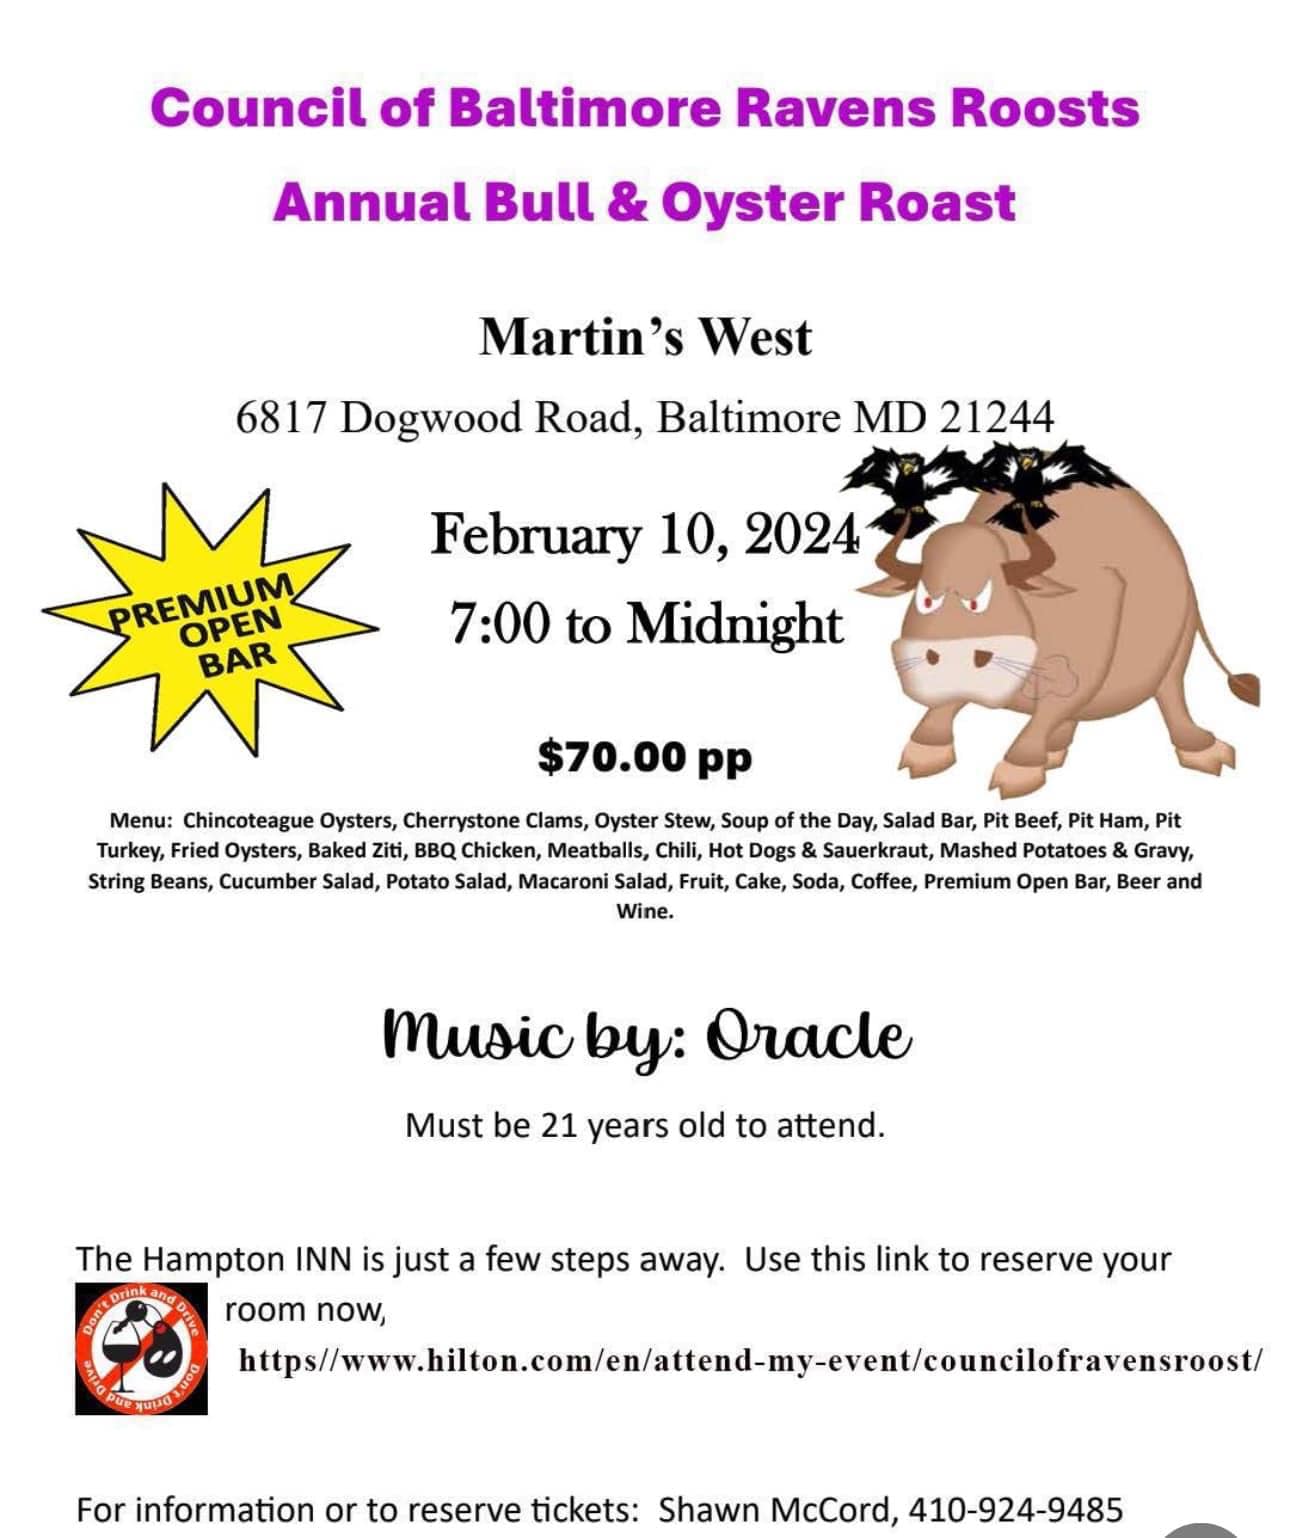 ravens roost baltimore bull and oyster roast february 2023 westminster md martins west